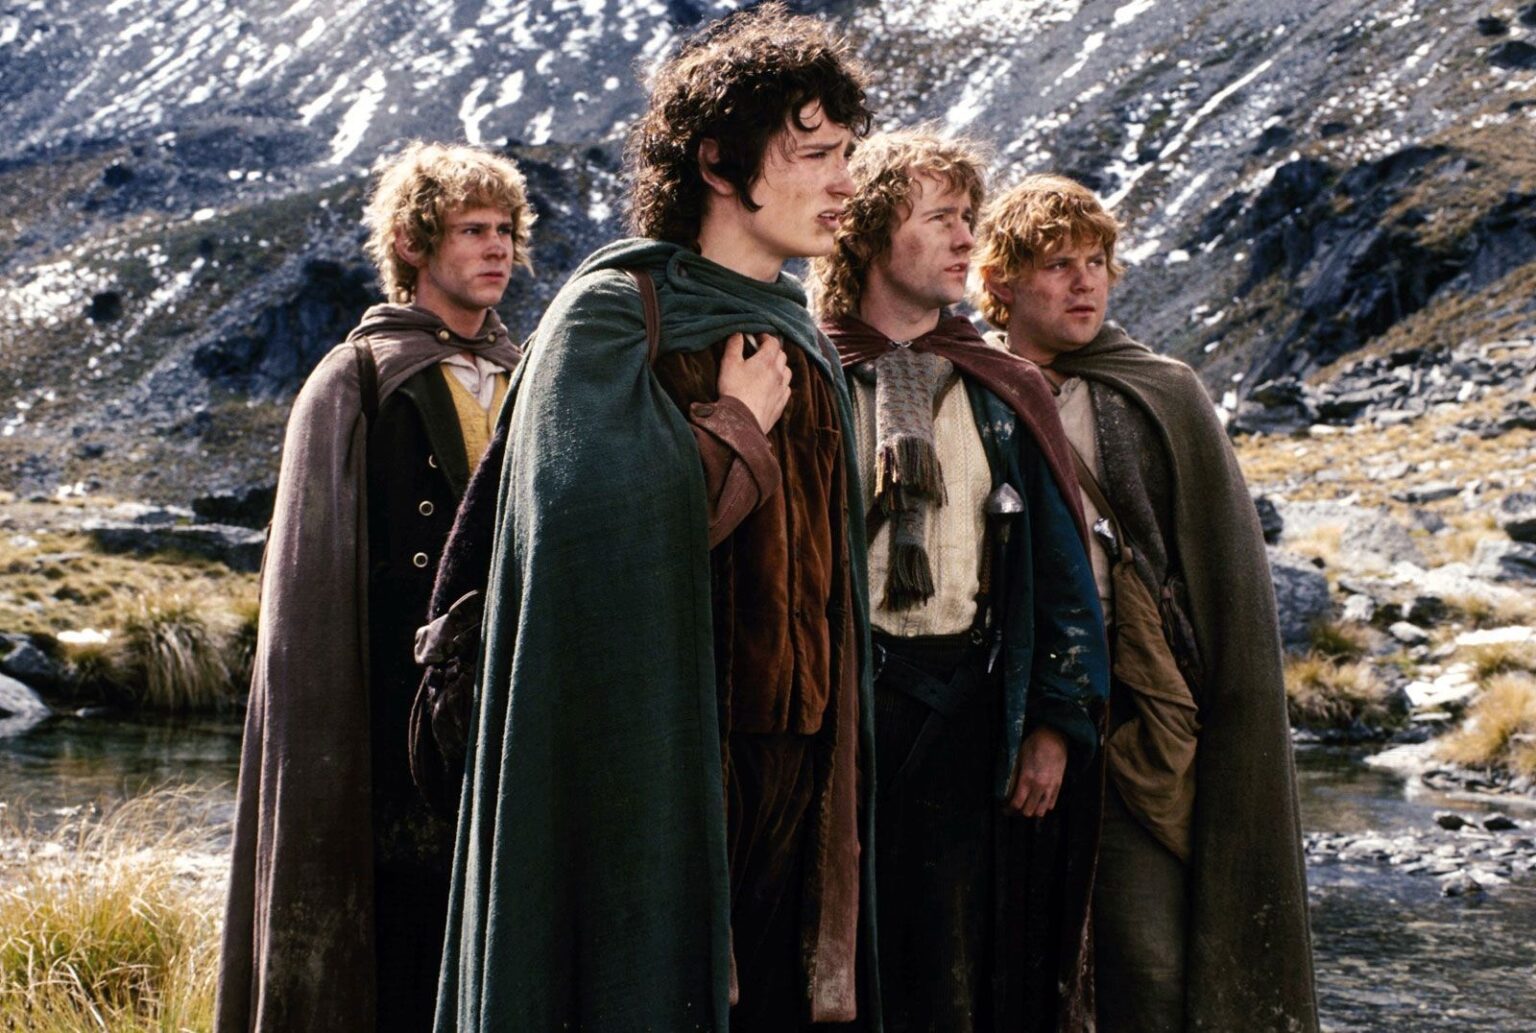 'The Lord of the Rings' story isn’t over just yet: Amazon has plans to revive J.R.R. Tolkein’s franchise. Who's the "greatest" villain?